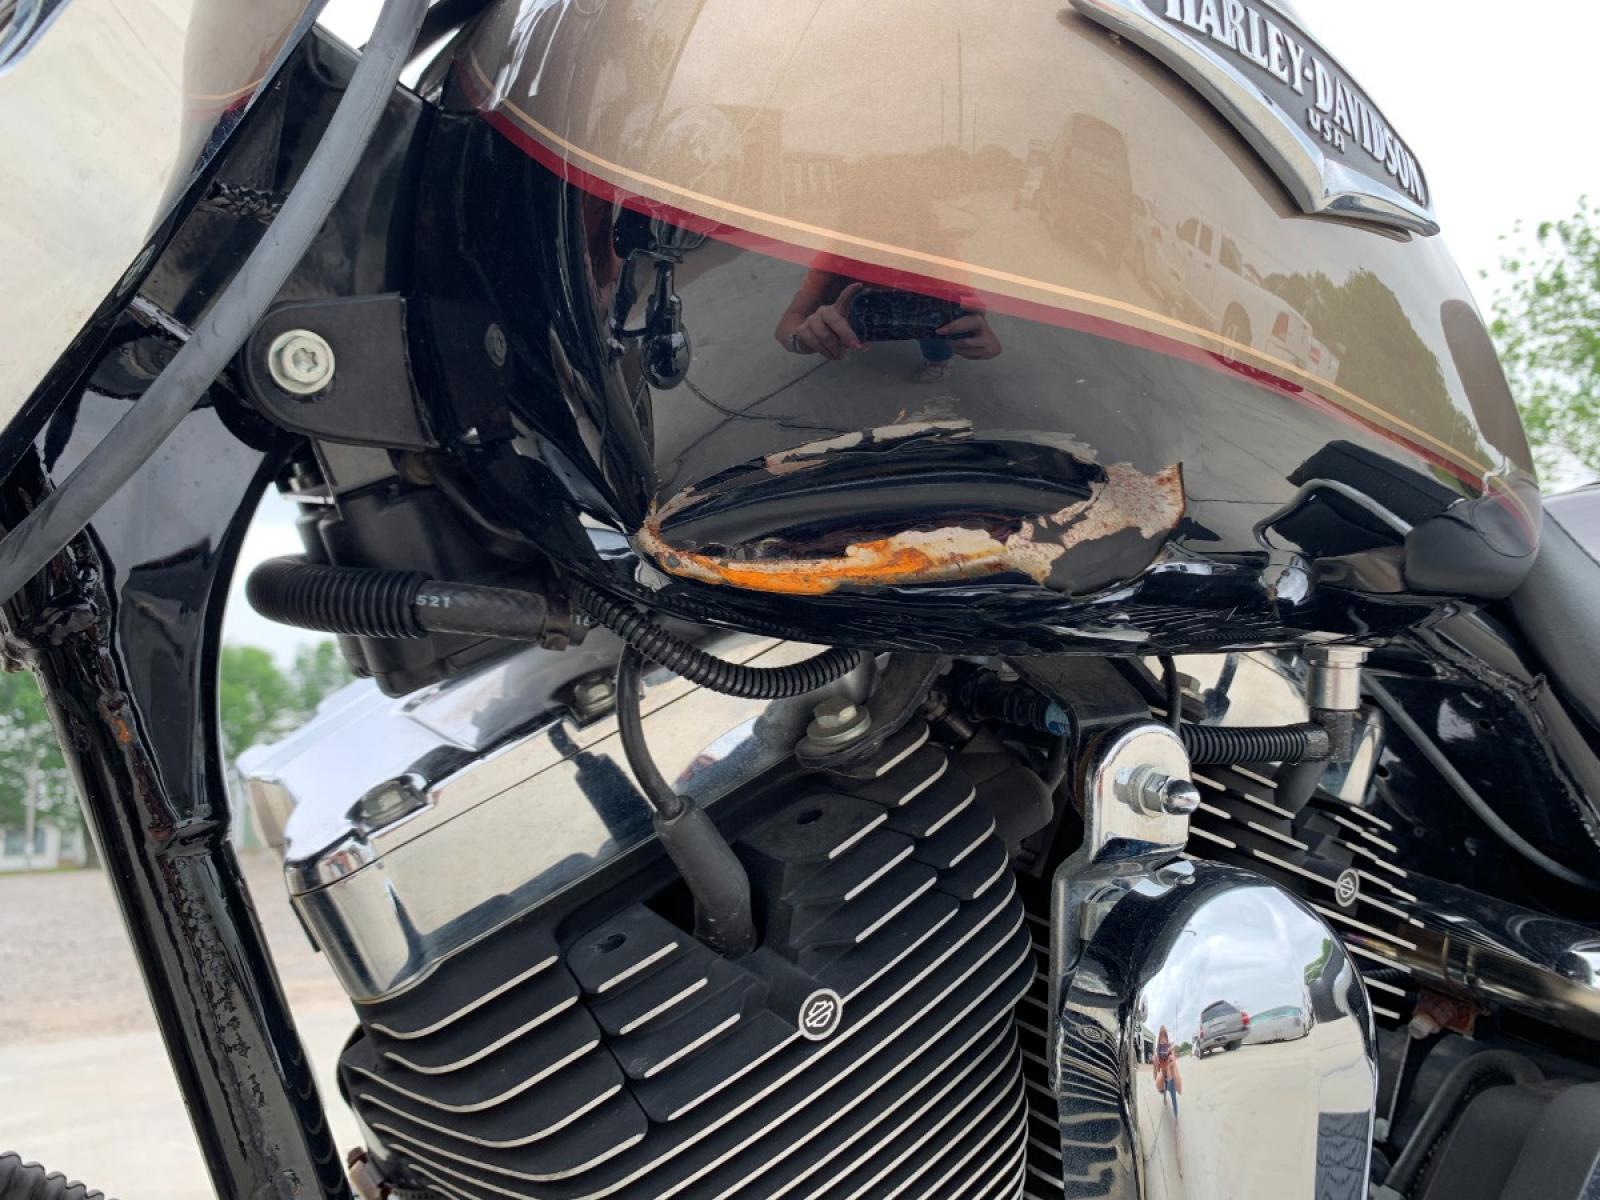 2004 GOLD Harley-Davidson FLHRCI ROAD KING (1HD1FRW104Y) with an 1450CC engine, 5 SPEED MANUAL transmission, located at 17760 HWY 62, MORRIS, 74445, 35.609104, -95.877060 - 2004 HARLEY DAVIDSON FLHRCI ROAD KING IS READY TO CRUISE THE HIGHWAYS. IT HAS A V2 FOUR-STROKE MOTOR, 1450CC, FEATURES LEATHER SEATS, ELECTRIC START, CRUISE CONTROL, 5-SPEED MANUAL, VANCE AND HINES DUAL EXHAUST, AND LEATHER-COVERED COMPOSITE SADDLEBAGS. IT APPEARS TO BE GARAGE KEPT. REBUILT TITLE D - Photo #15